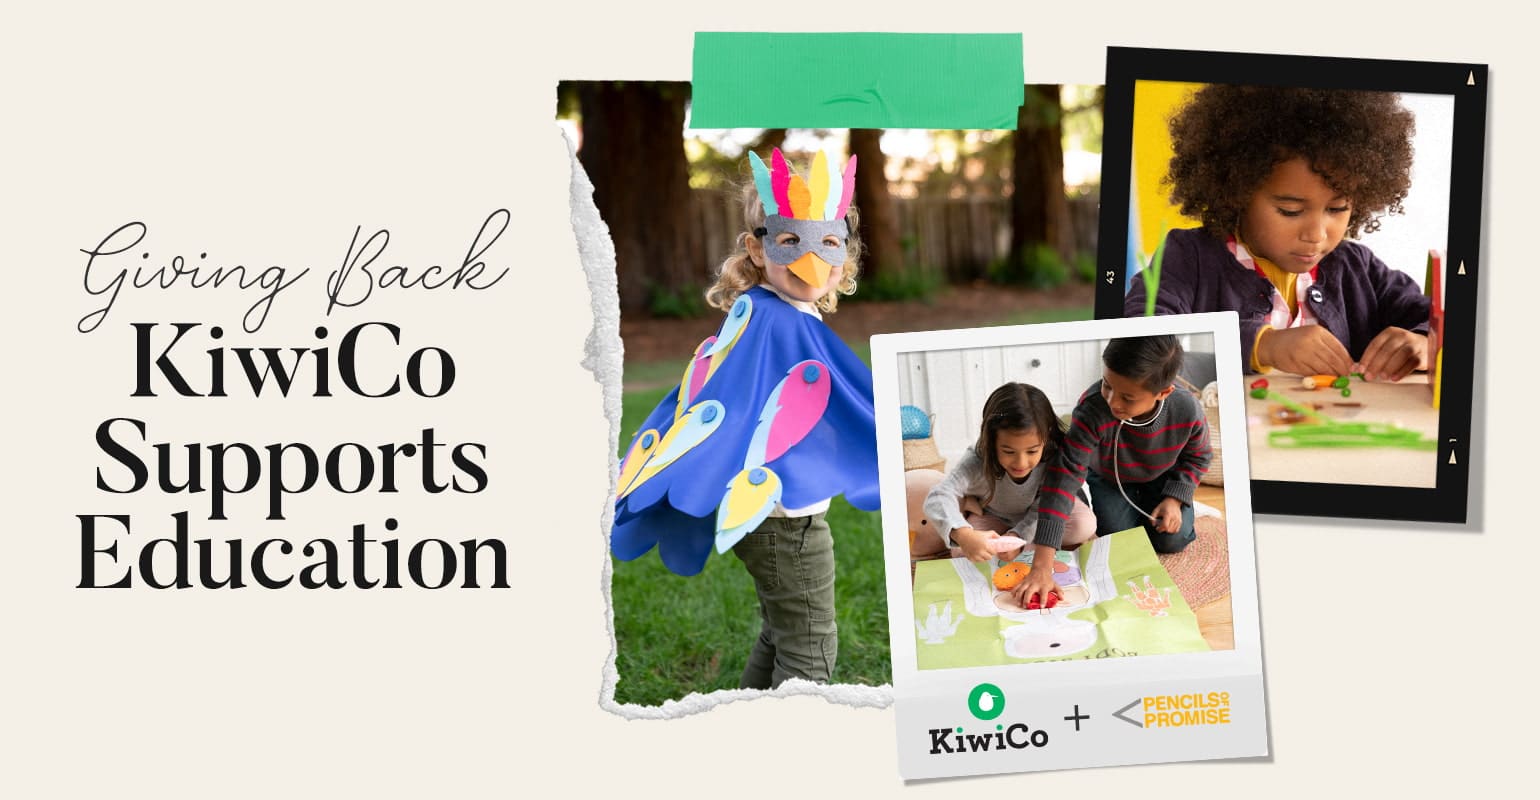 KiwiCo supports Education and Pencils of Promise